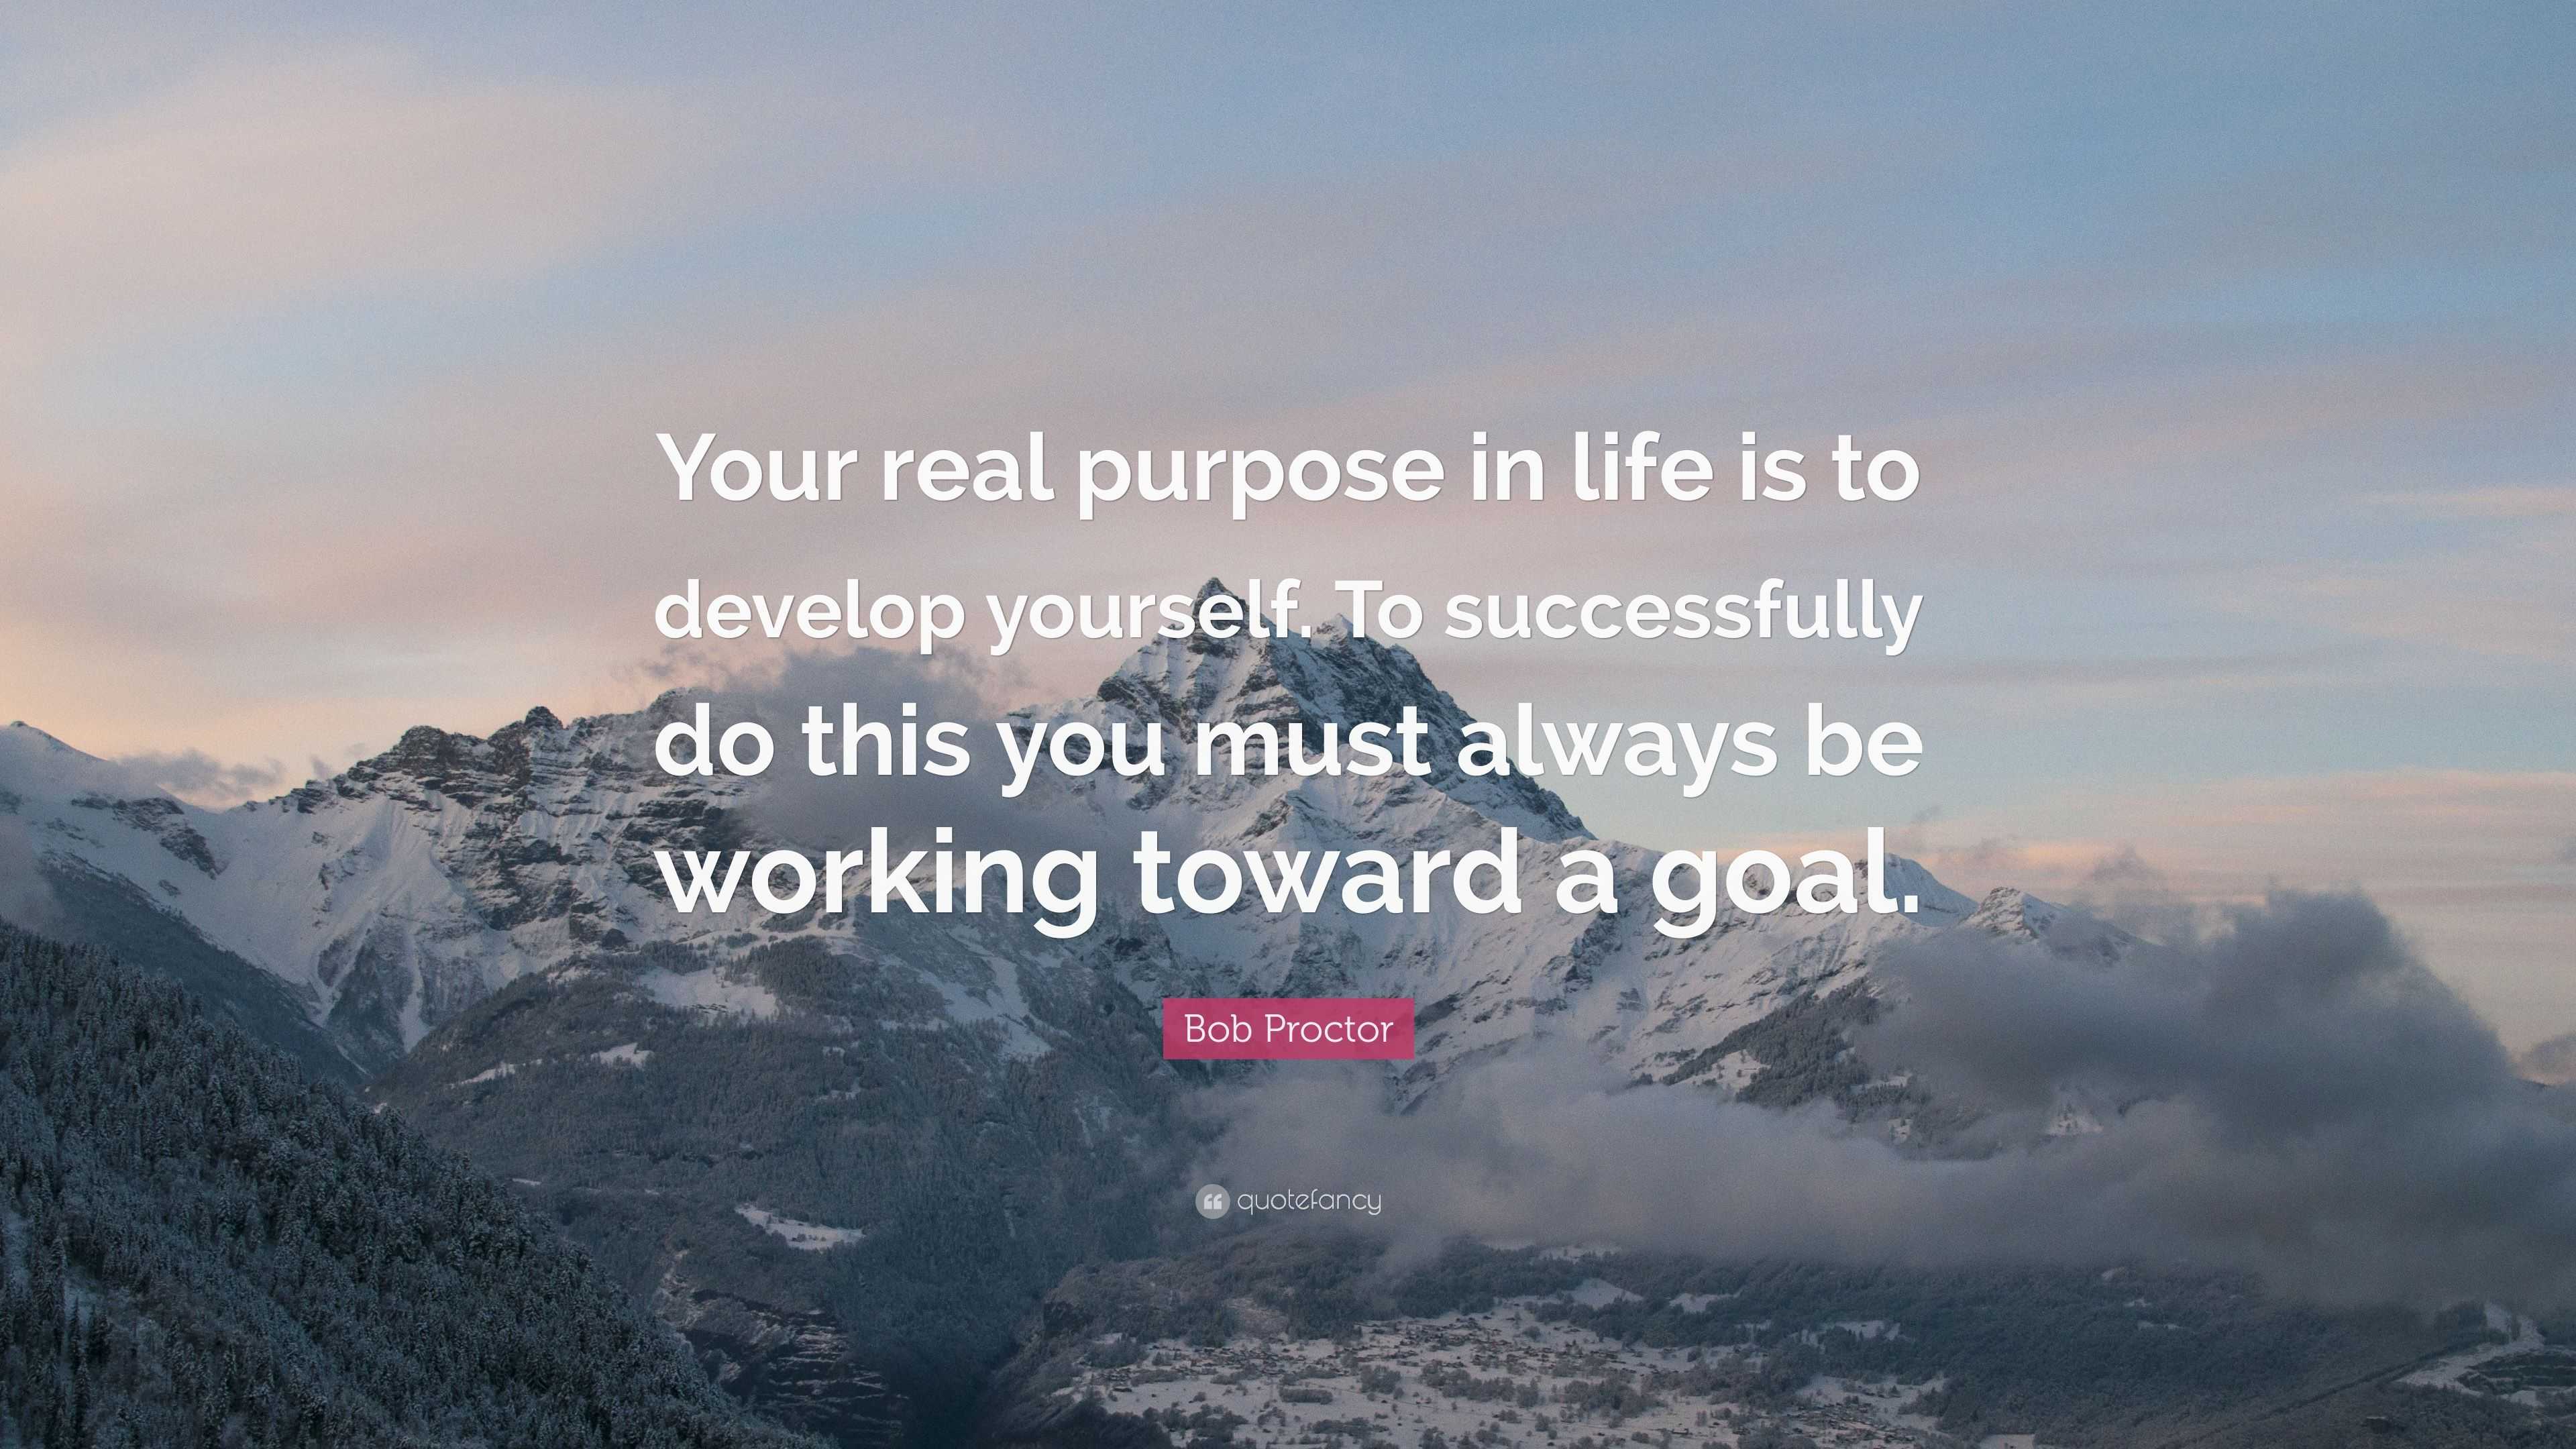 This Is The Real Purpose of Life!